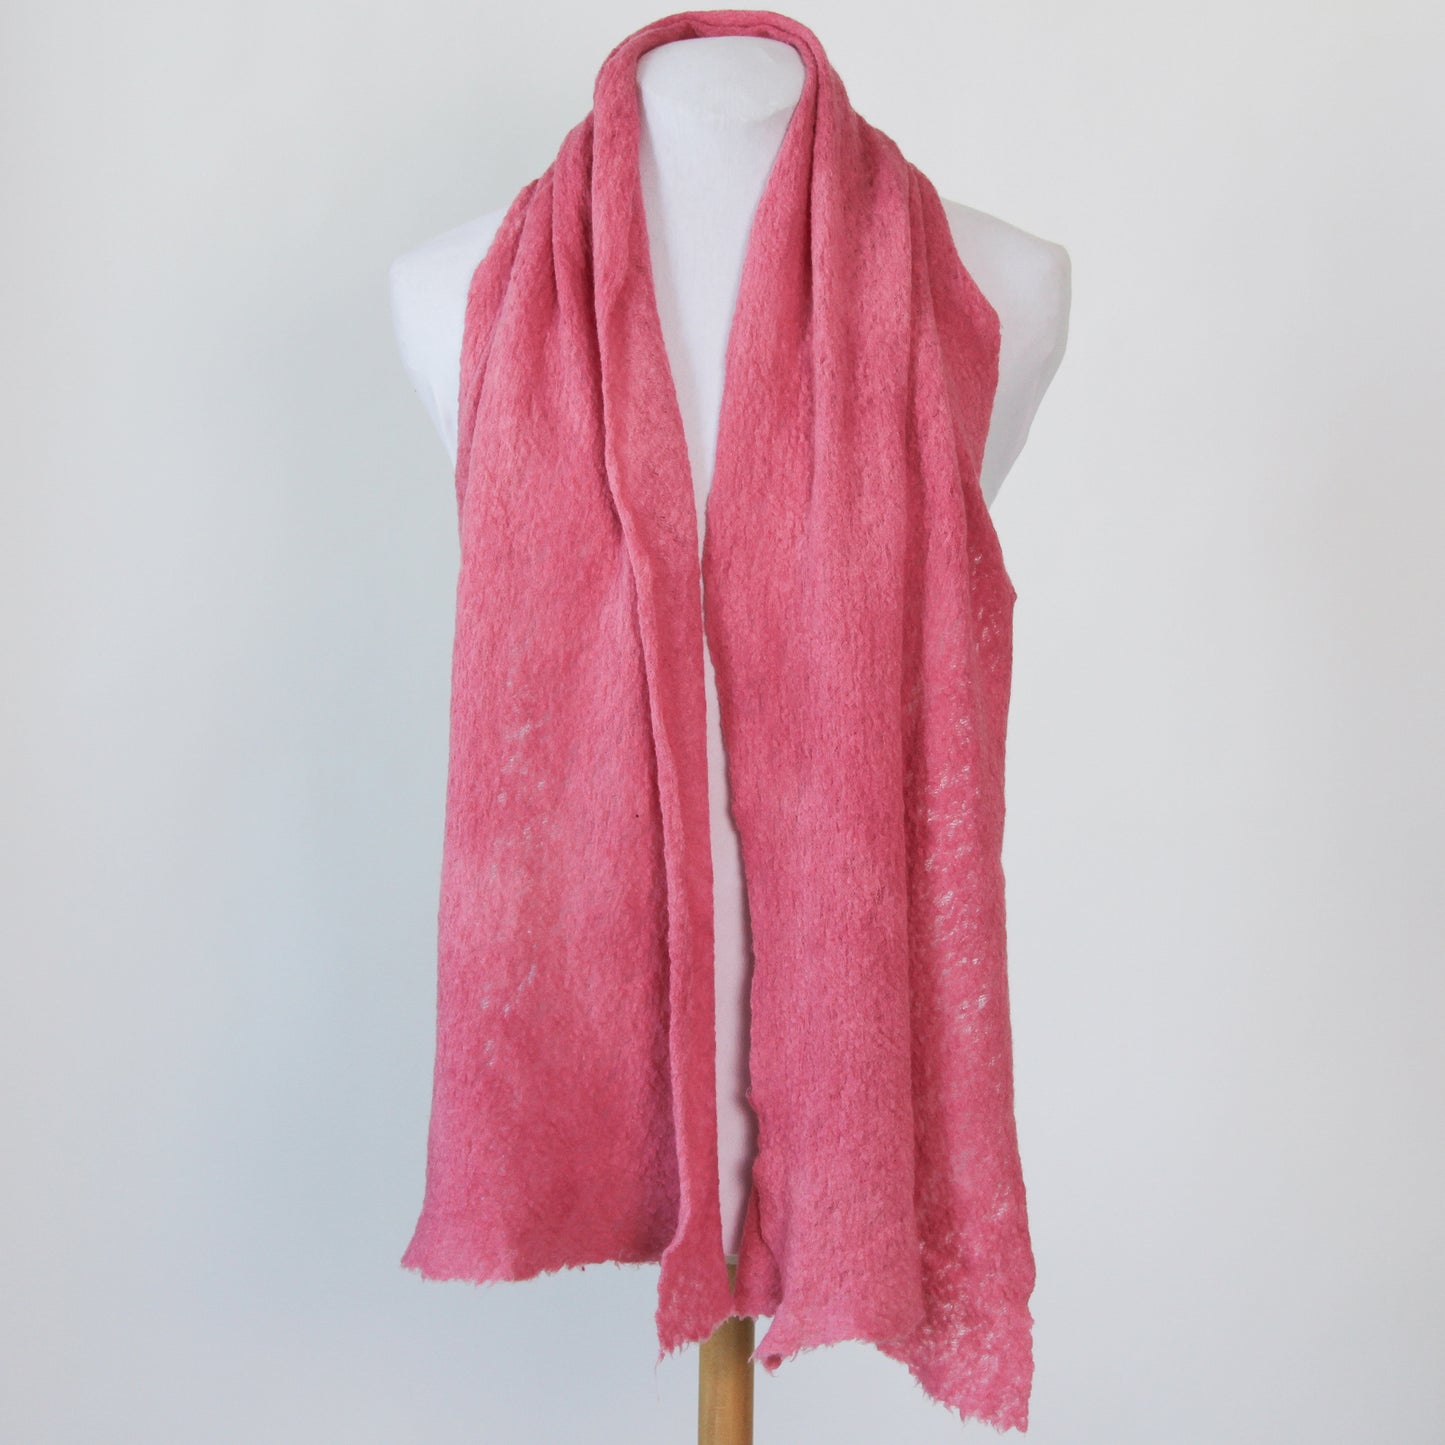 Naturally Dyed Wool Scarf - Very Berry